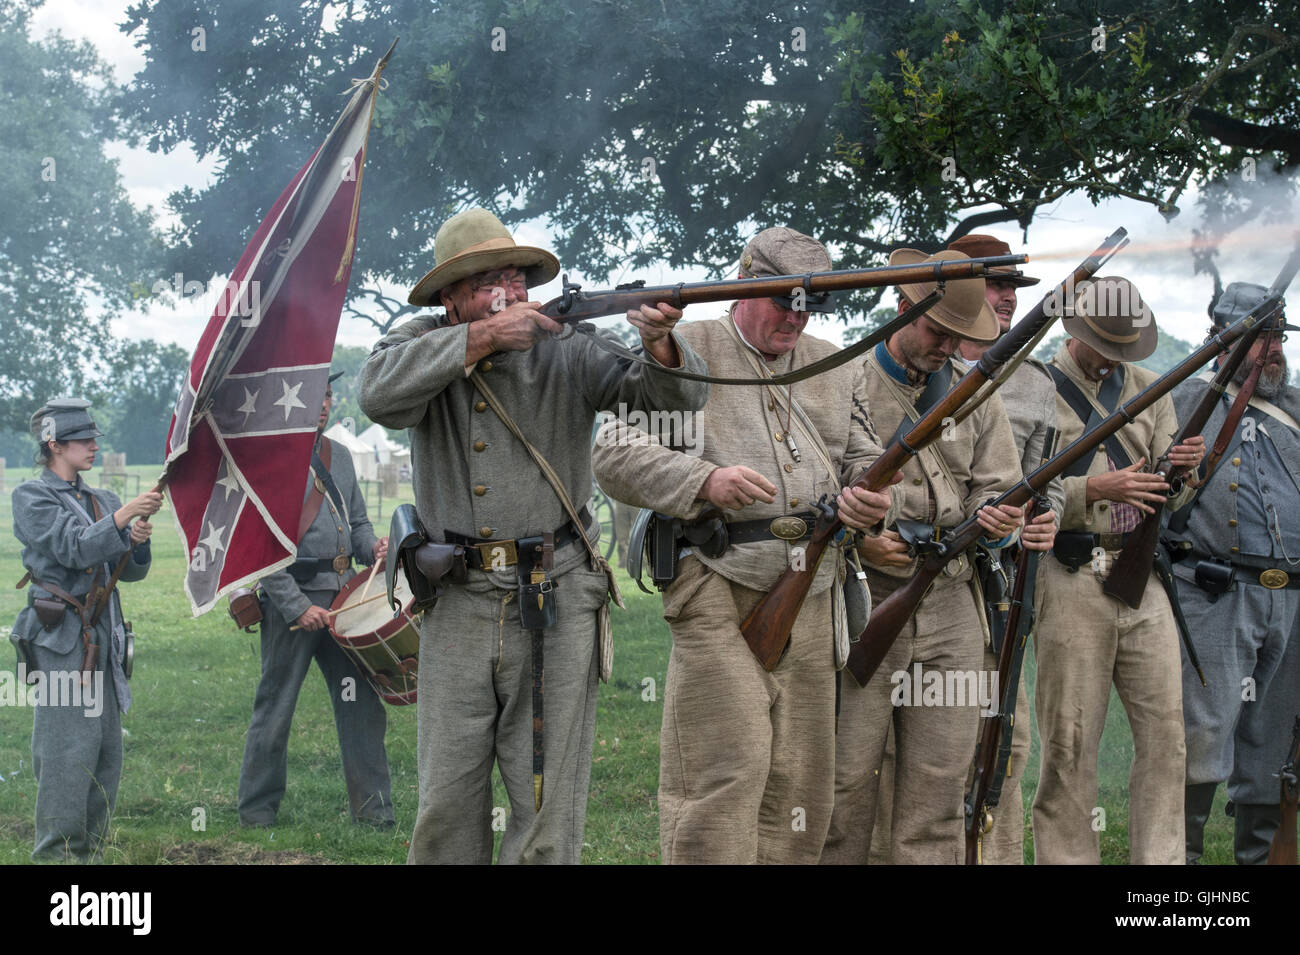 Confederate Soldiers on the battlefield of a American Civil war reenactment at Spetchley Park, Worcestershire, England Stock Photo